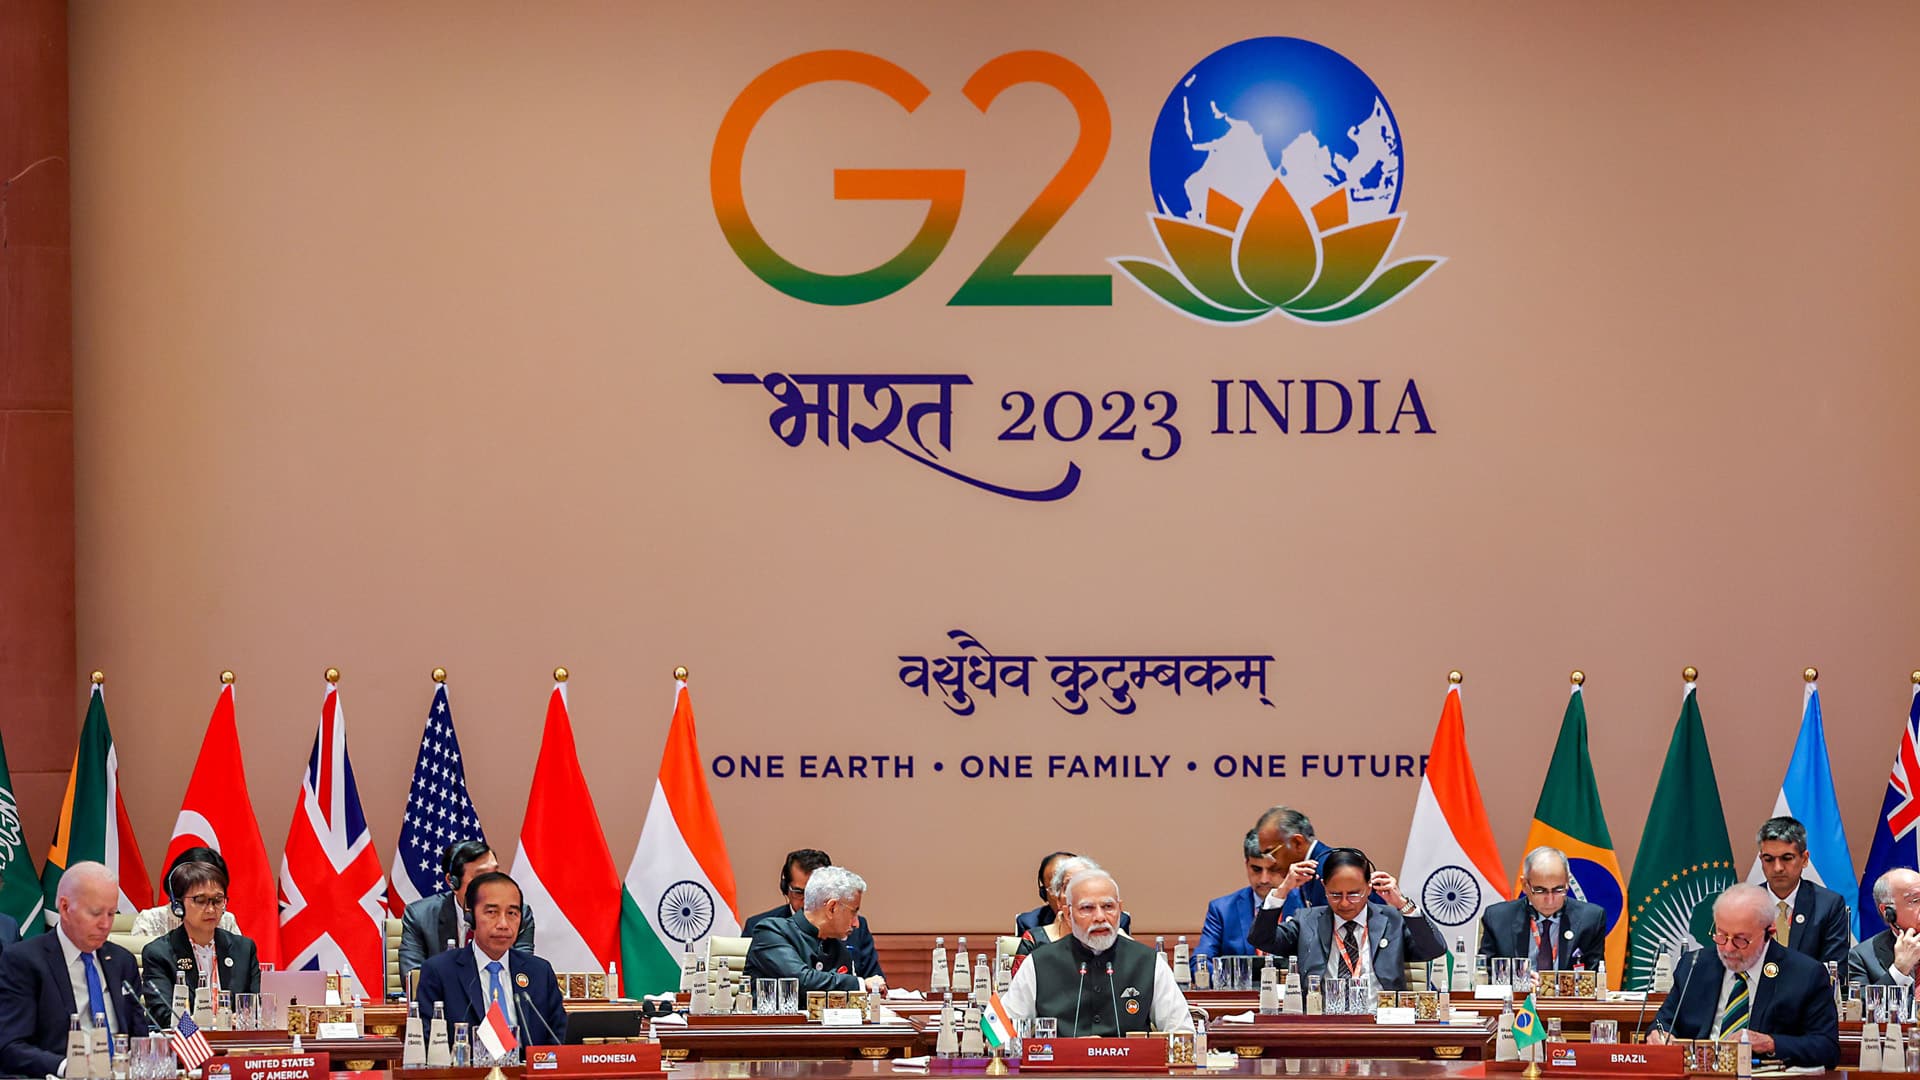 G20 leaders decide on swift implementation of crypto reporting framework